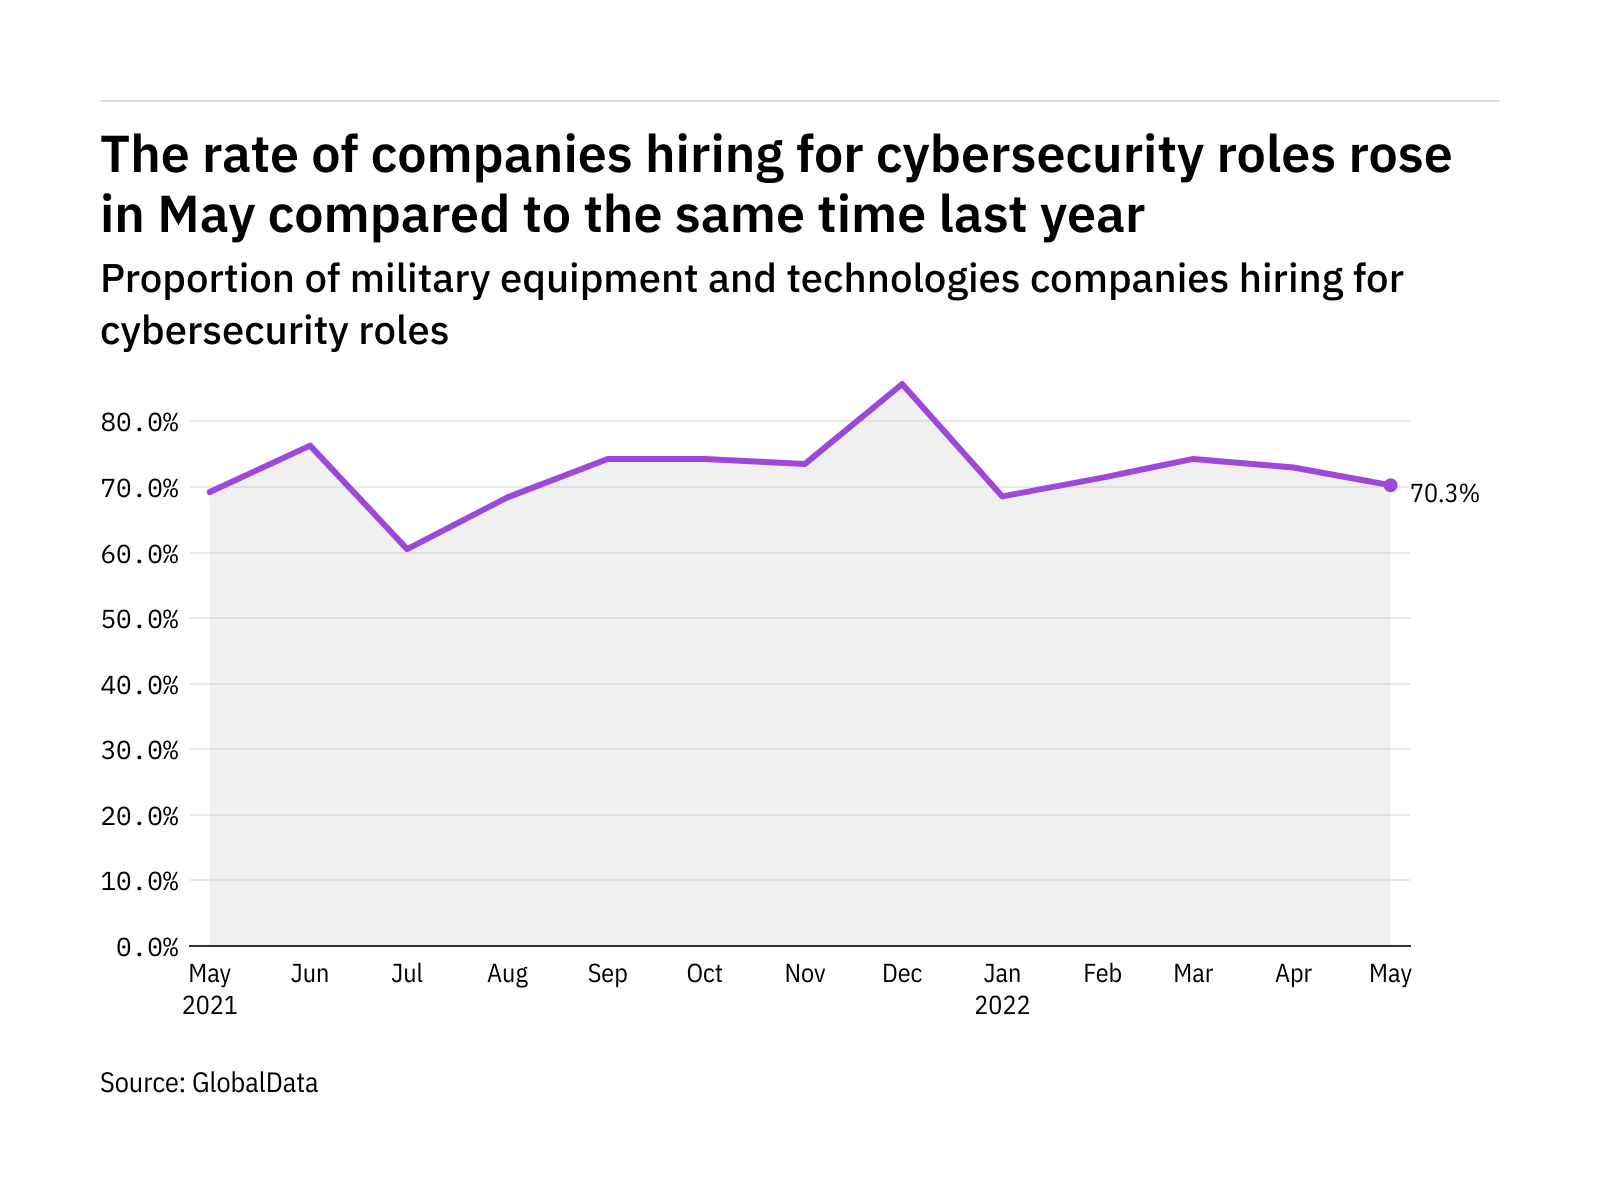 Cybersecurity hiring levels in the military industry rose in May 2022